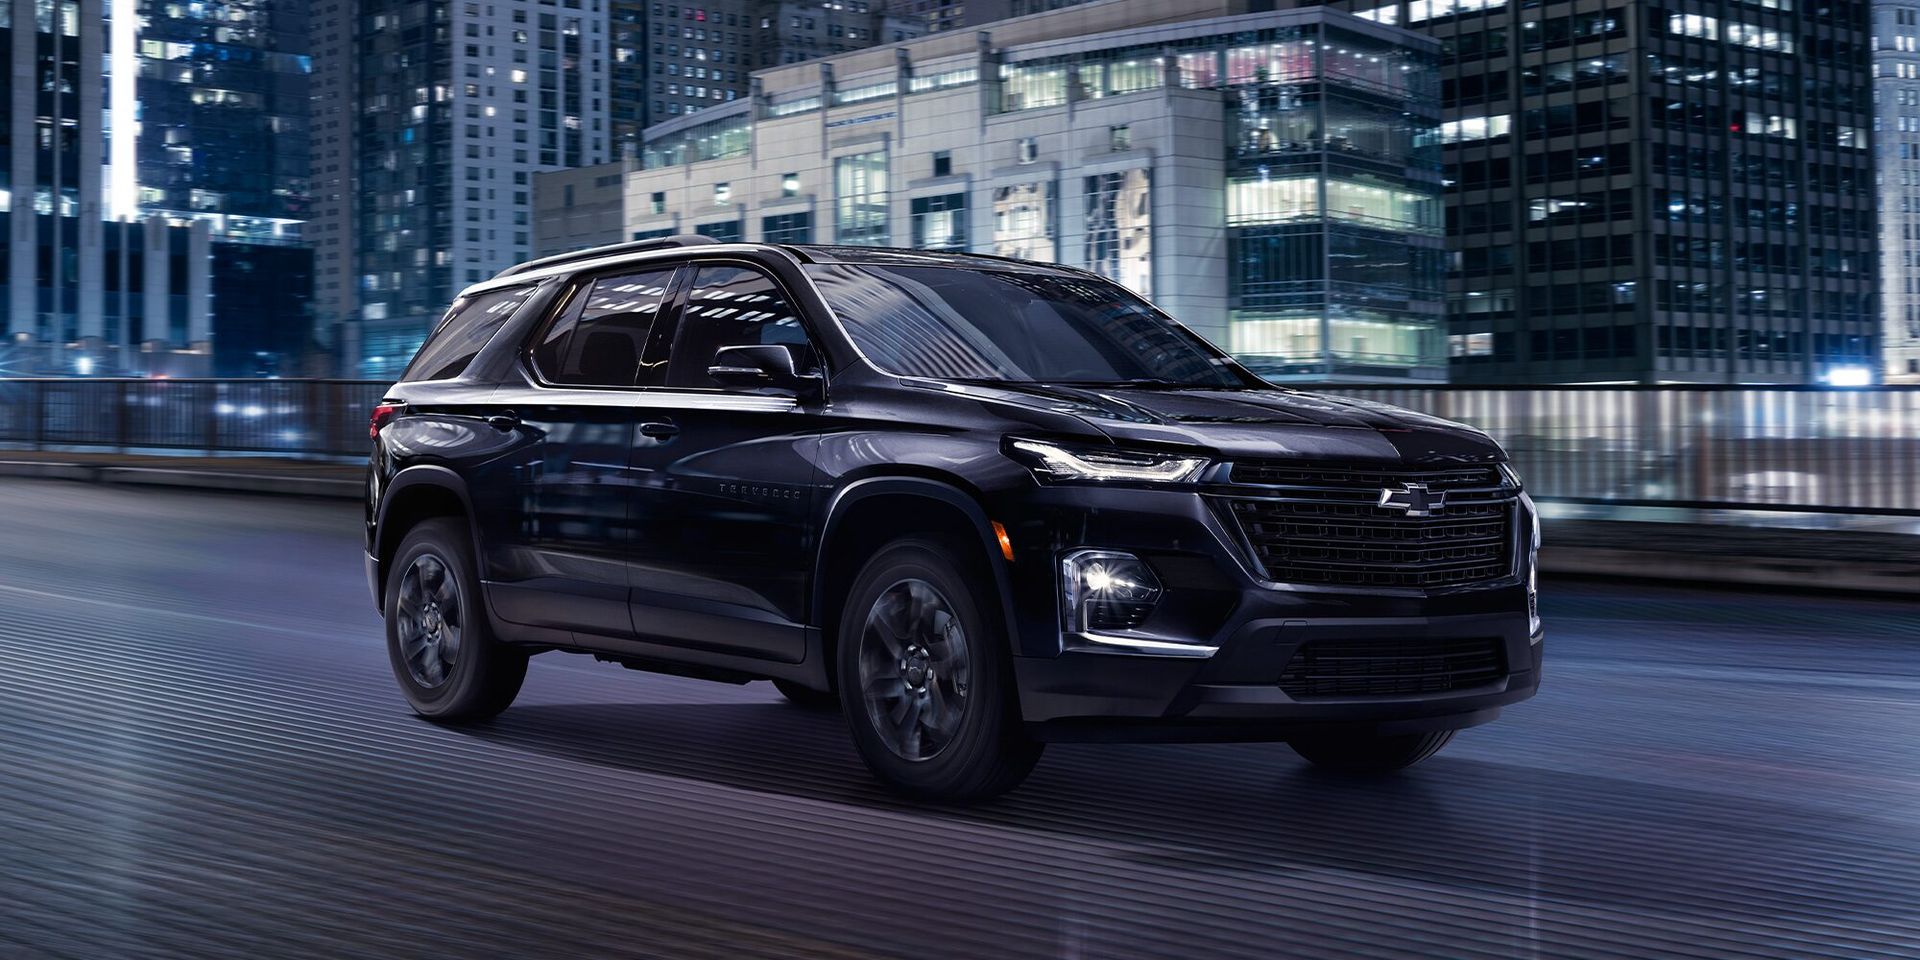 2023 Chevrolet Traverse Style and Comfort Features